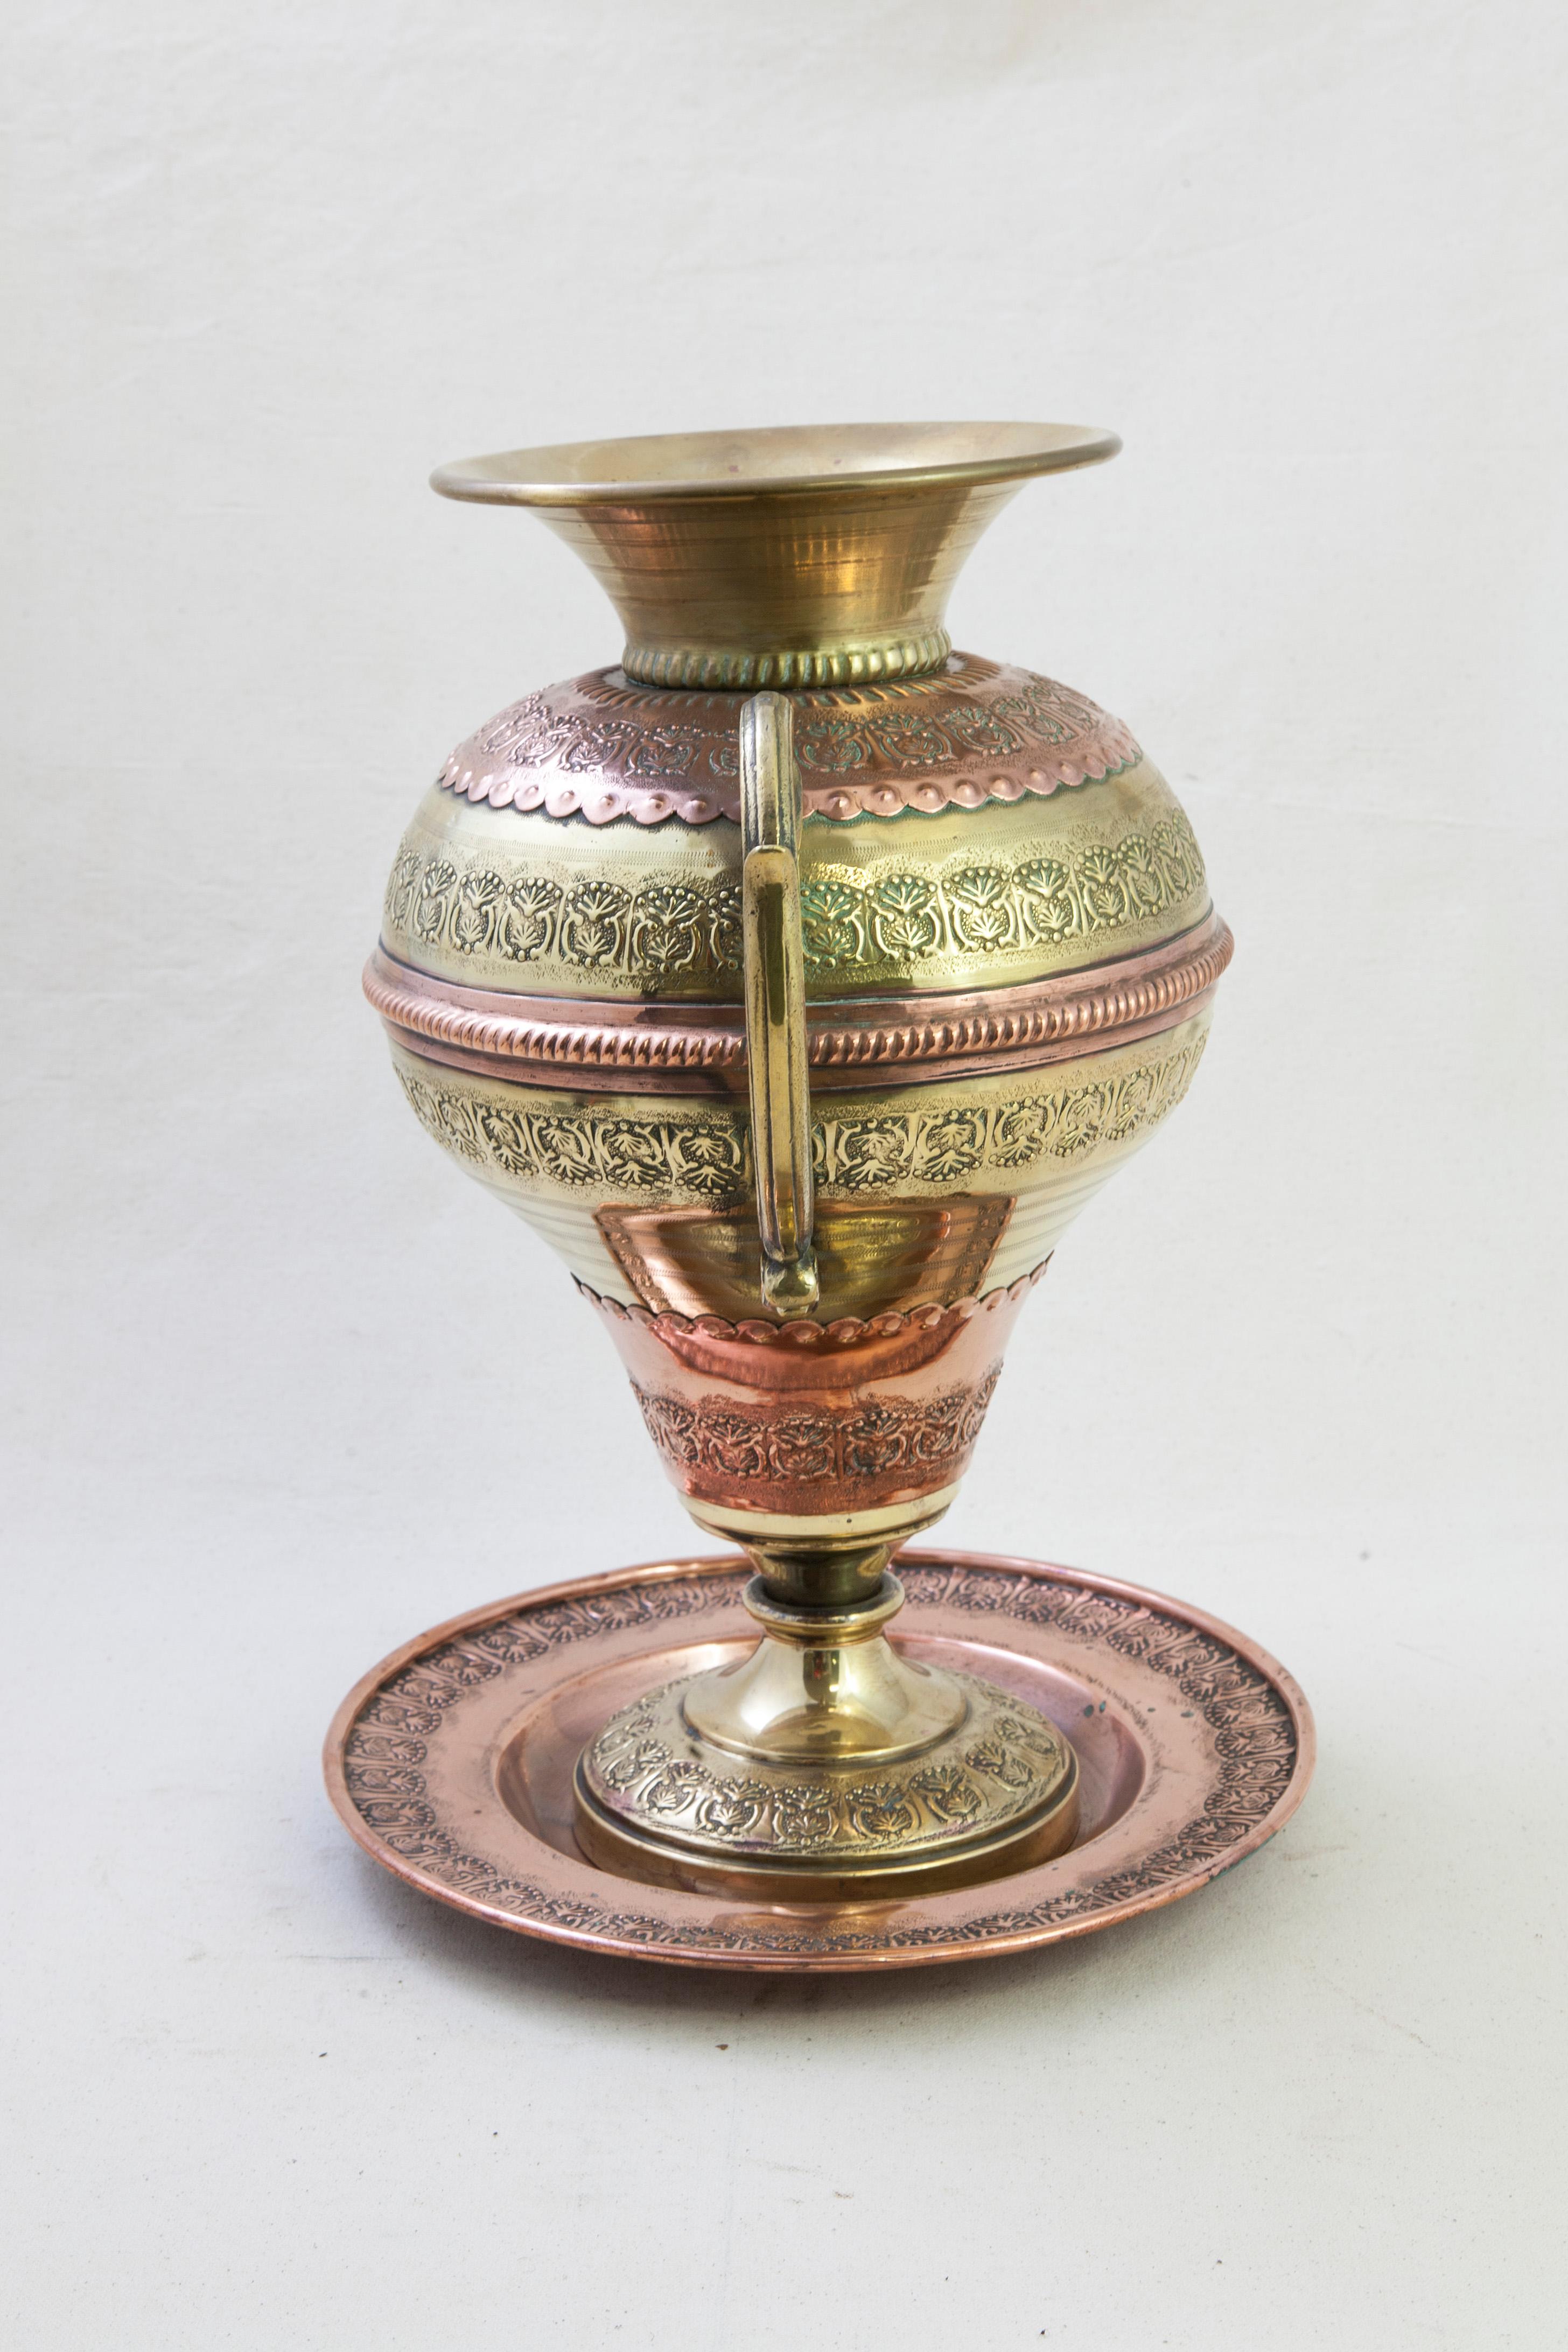 This turn of the twentieth century copper and brass urn or vase comes with its original platter. The vase is detailed with repousse leaf and scrolling patterns alternating with incising and scalloped edging. A scrolling leaf handle appoints each